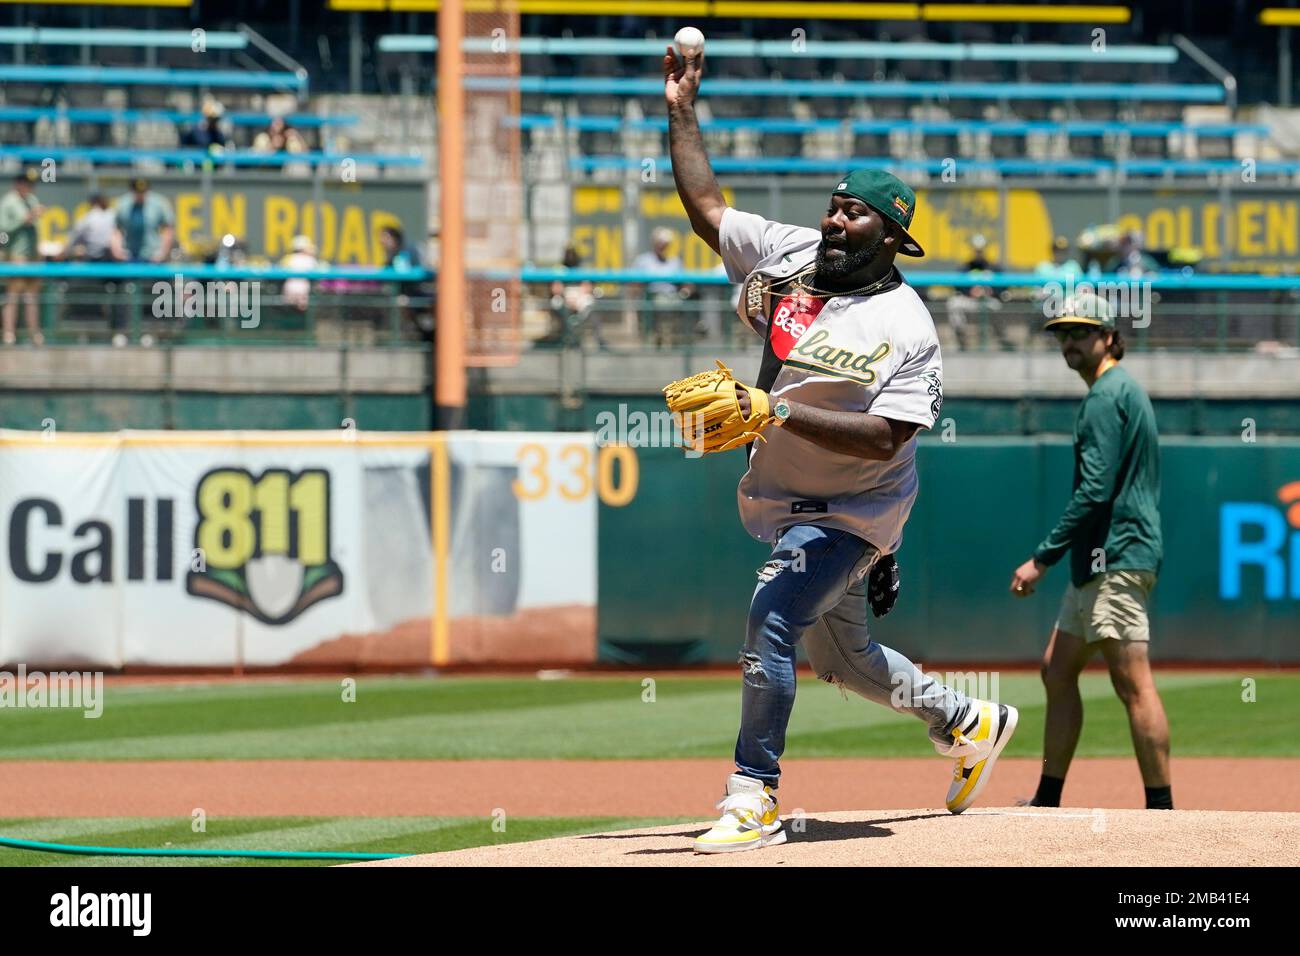 https://c8.alamy.com/comp/2MB41E4/oakland-rapper-mistah-fab-throws-the-first-pitch-before-a-baseball-game-between-the-oakland-athletics-and-the-houston-astros-in-oakland-calif-saturday-july-9-2022-ap-photogodofredo-a-vsquez-2MB41E4.jpg